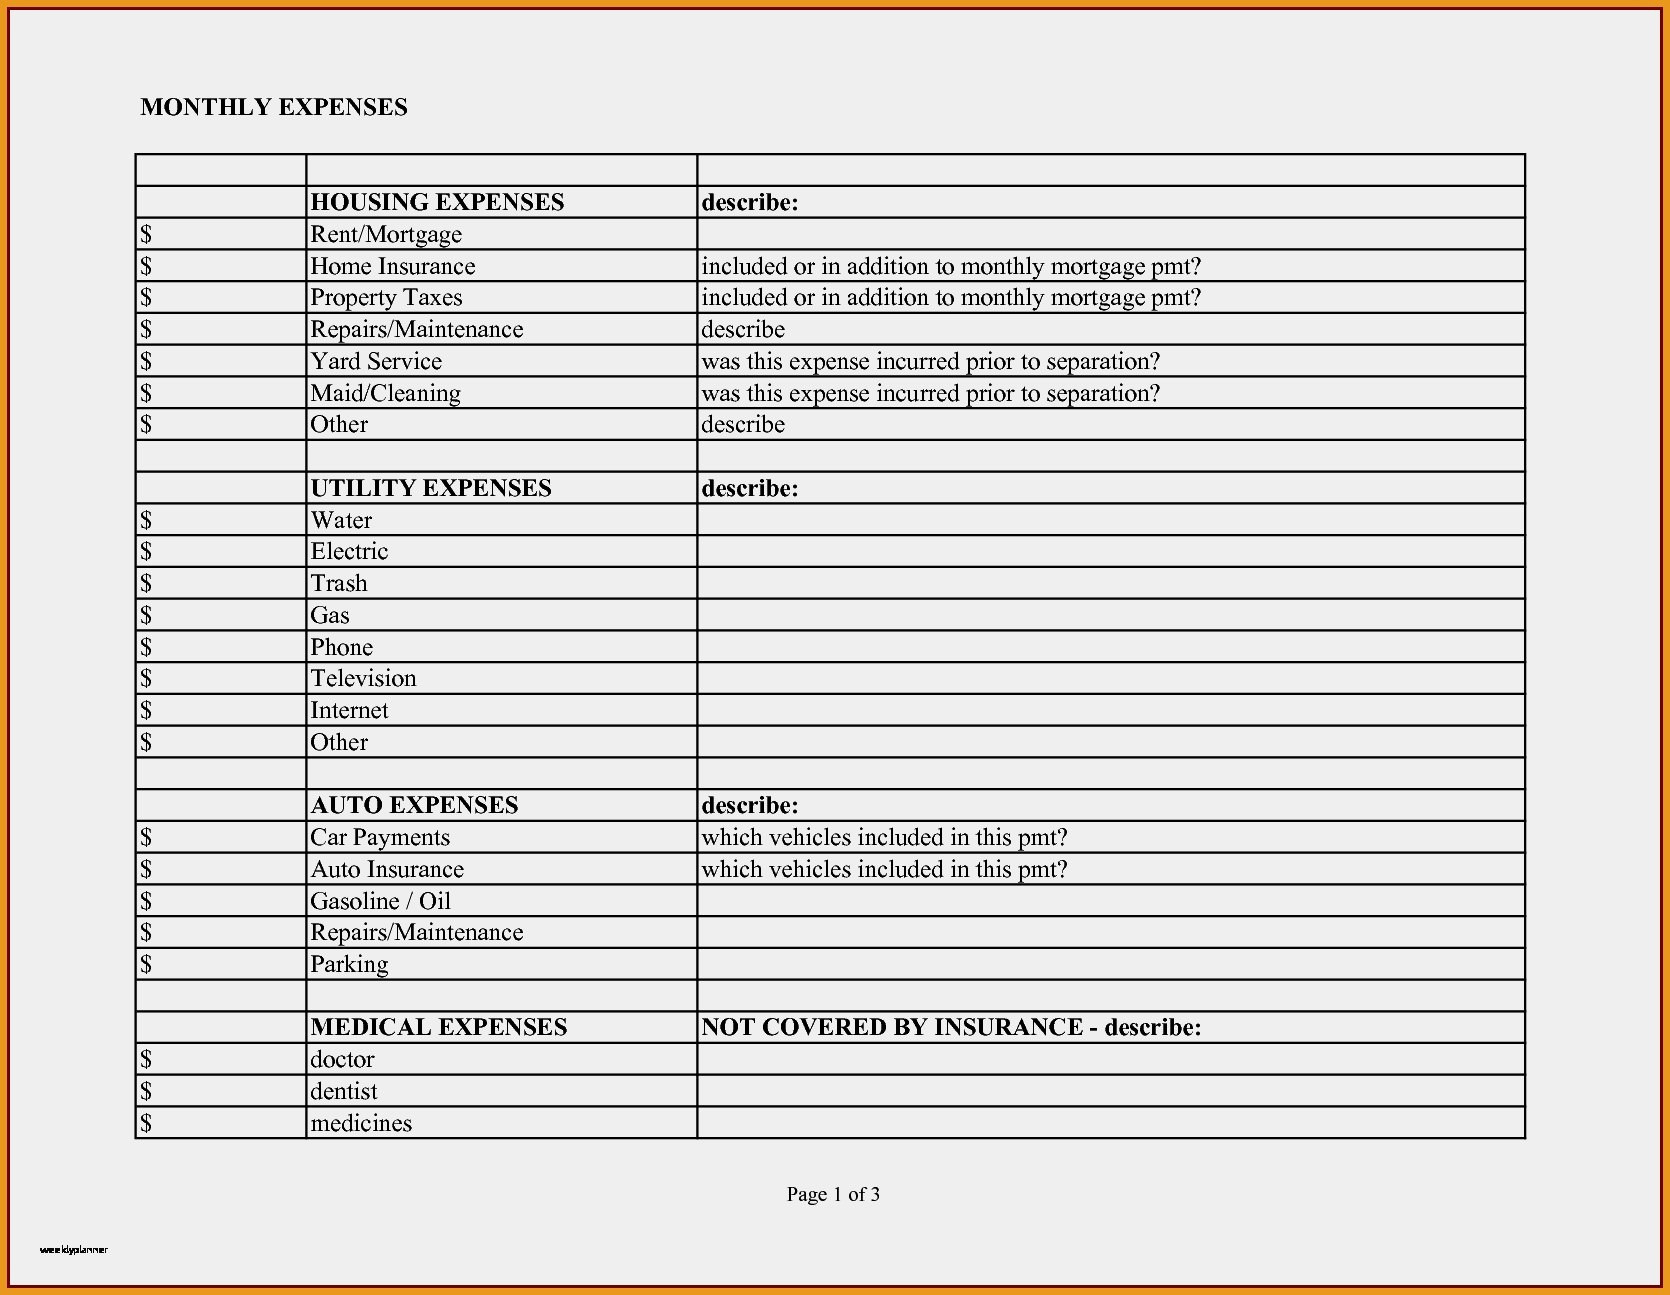 Business Expense Spreadsheet For Taxes Rental Property Tax with